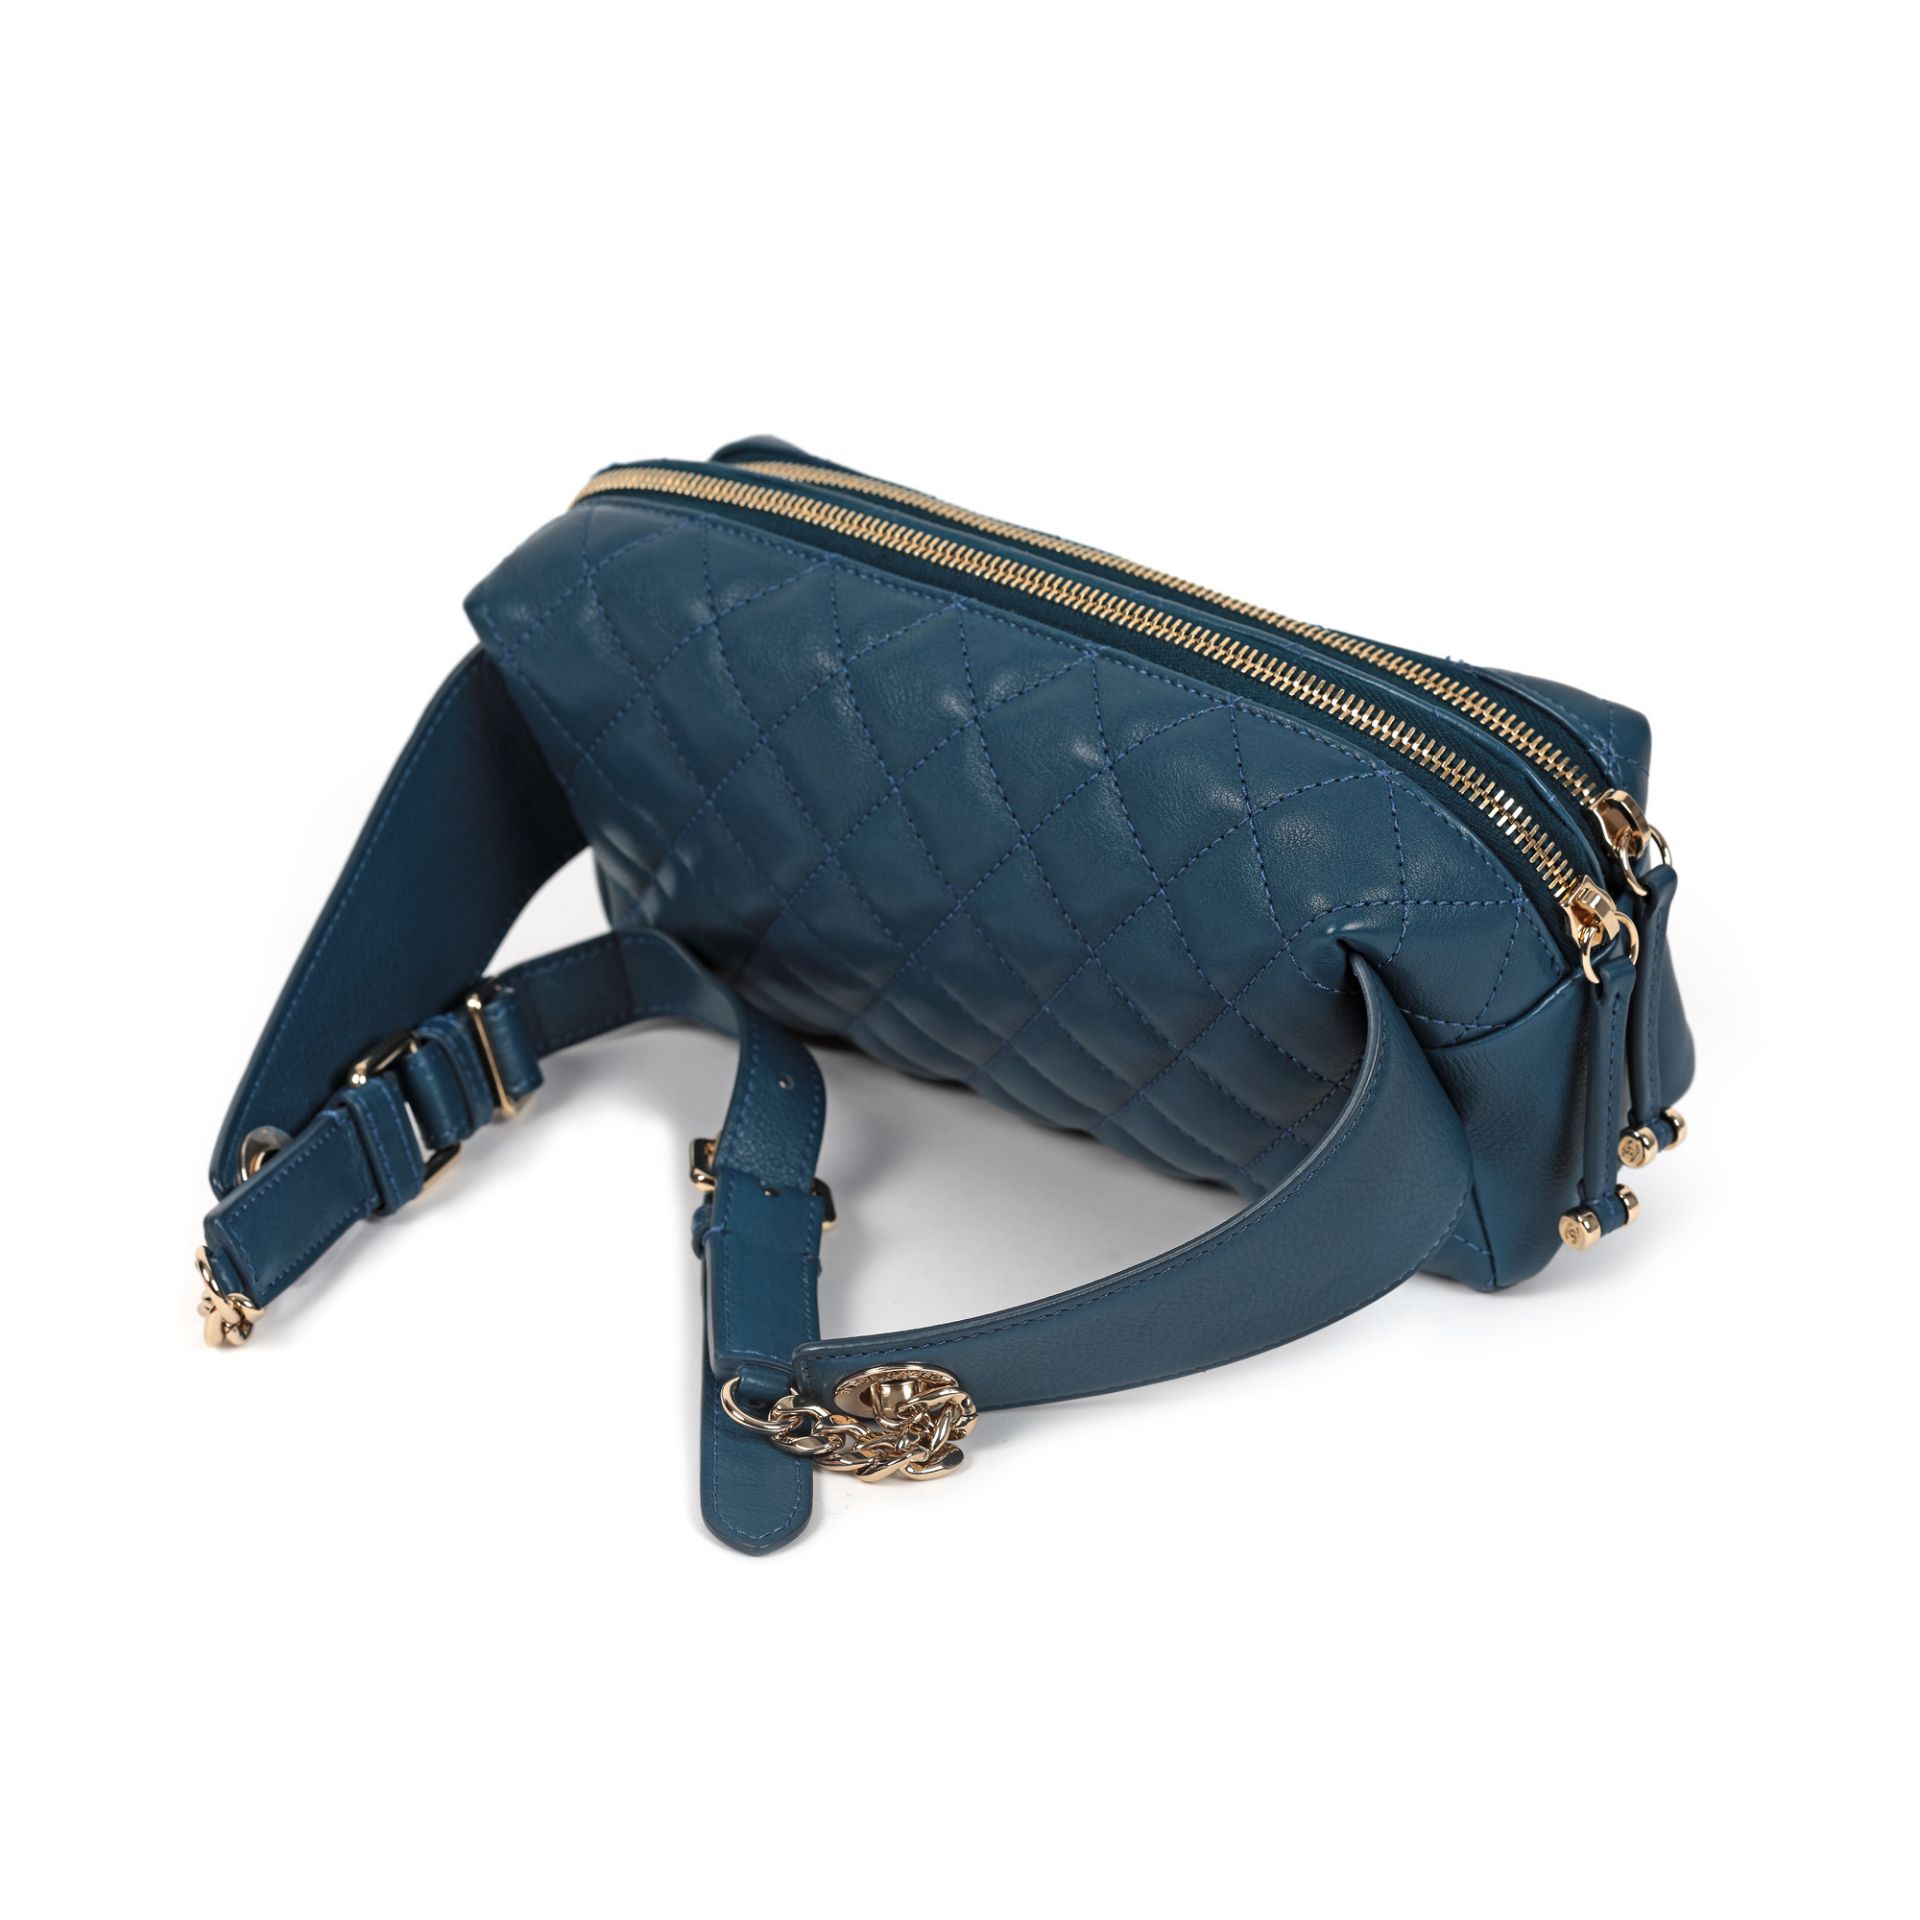 Chanel carrying case, quilted leather, blue - Image 3 of 5